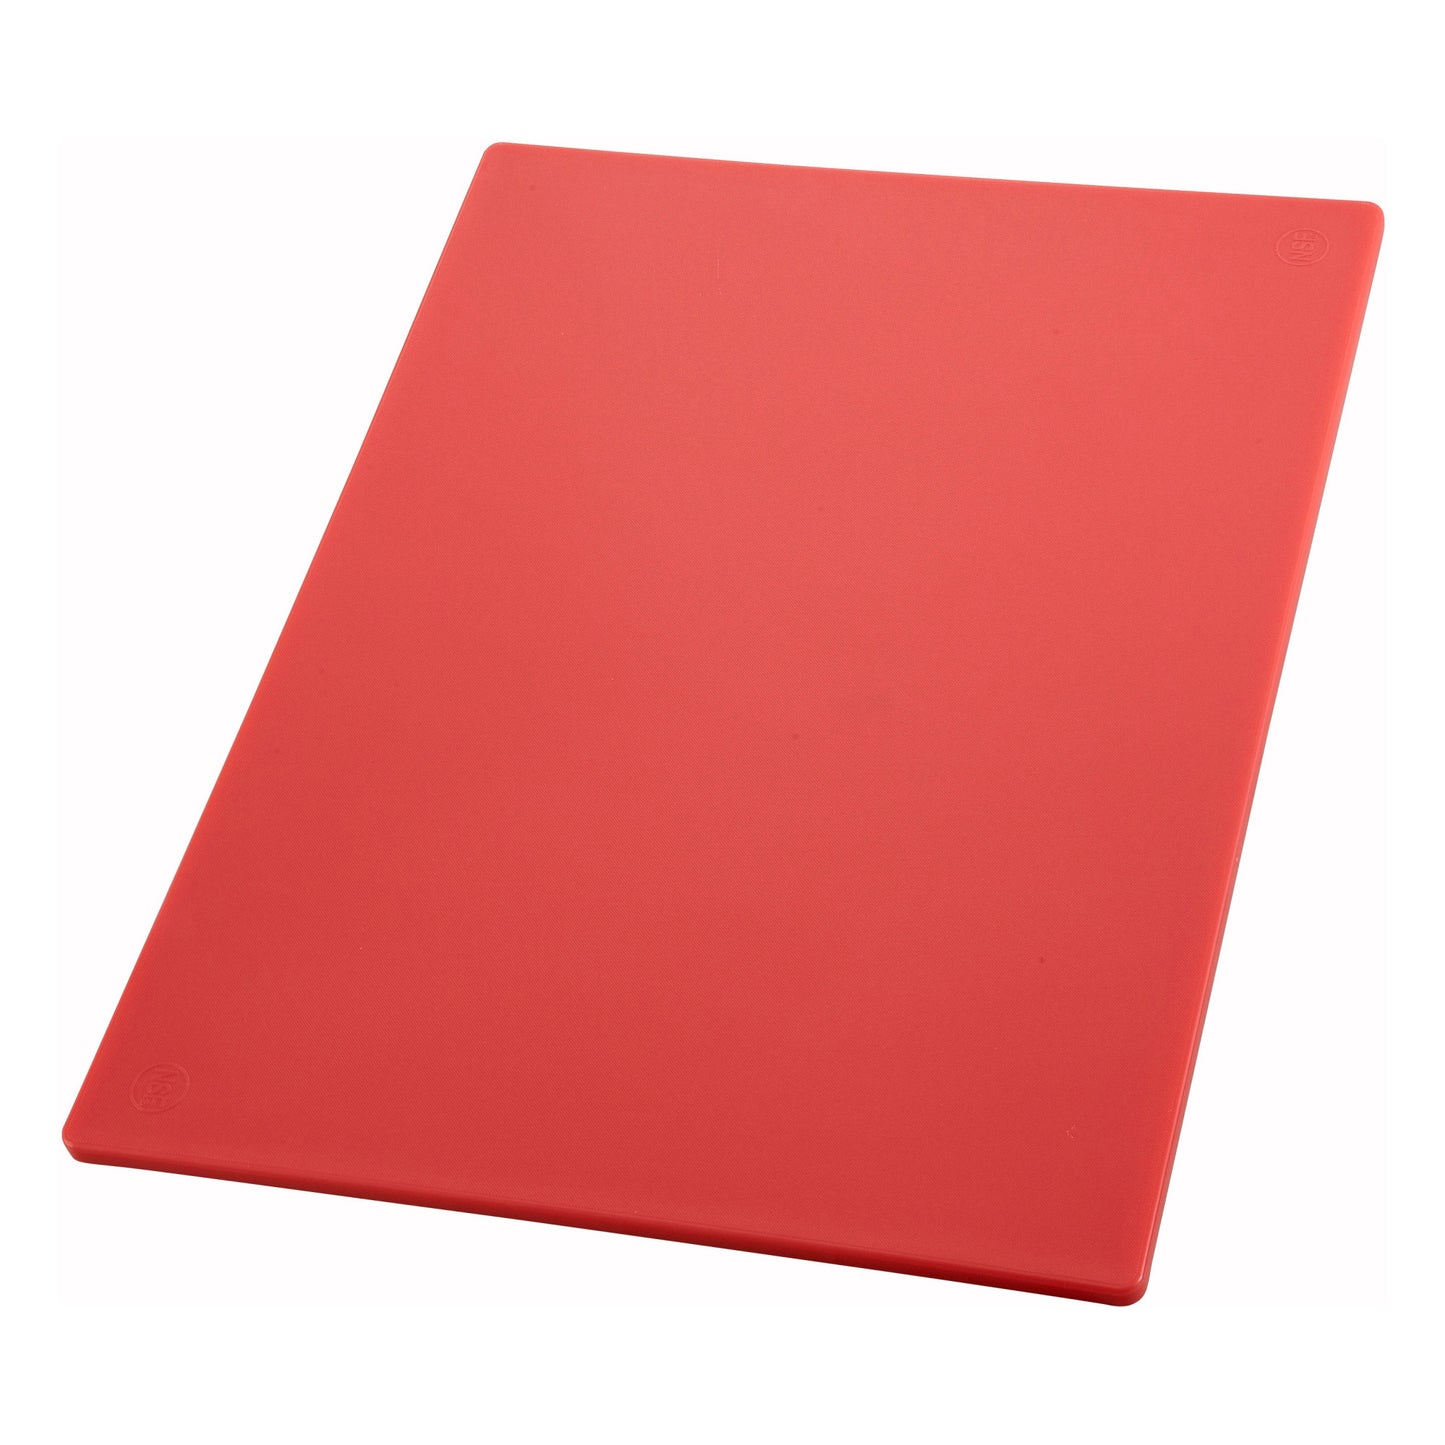 CBRD-1824 - HACCP Color-Coded Cutting Board - 18 x 24, Red